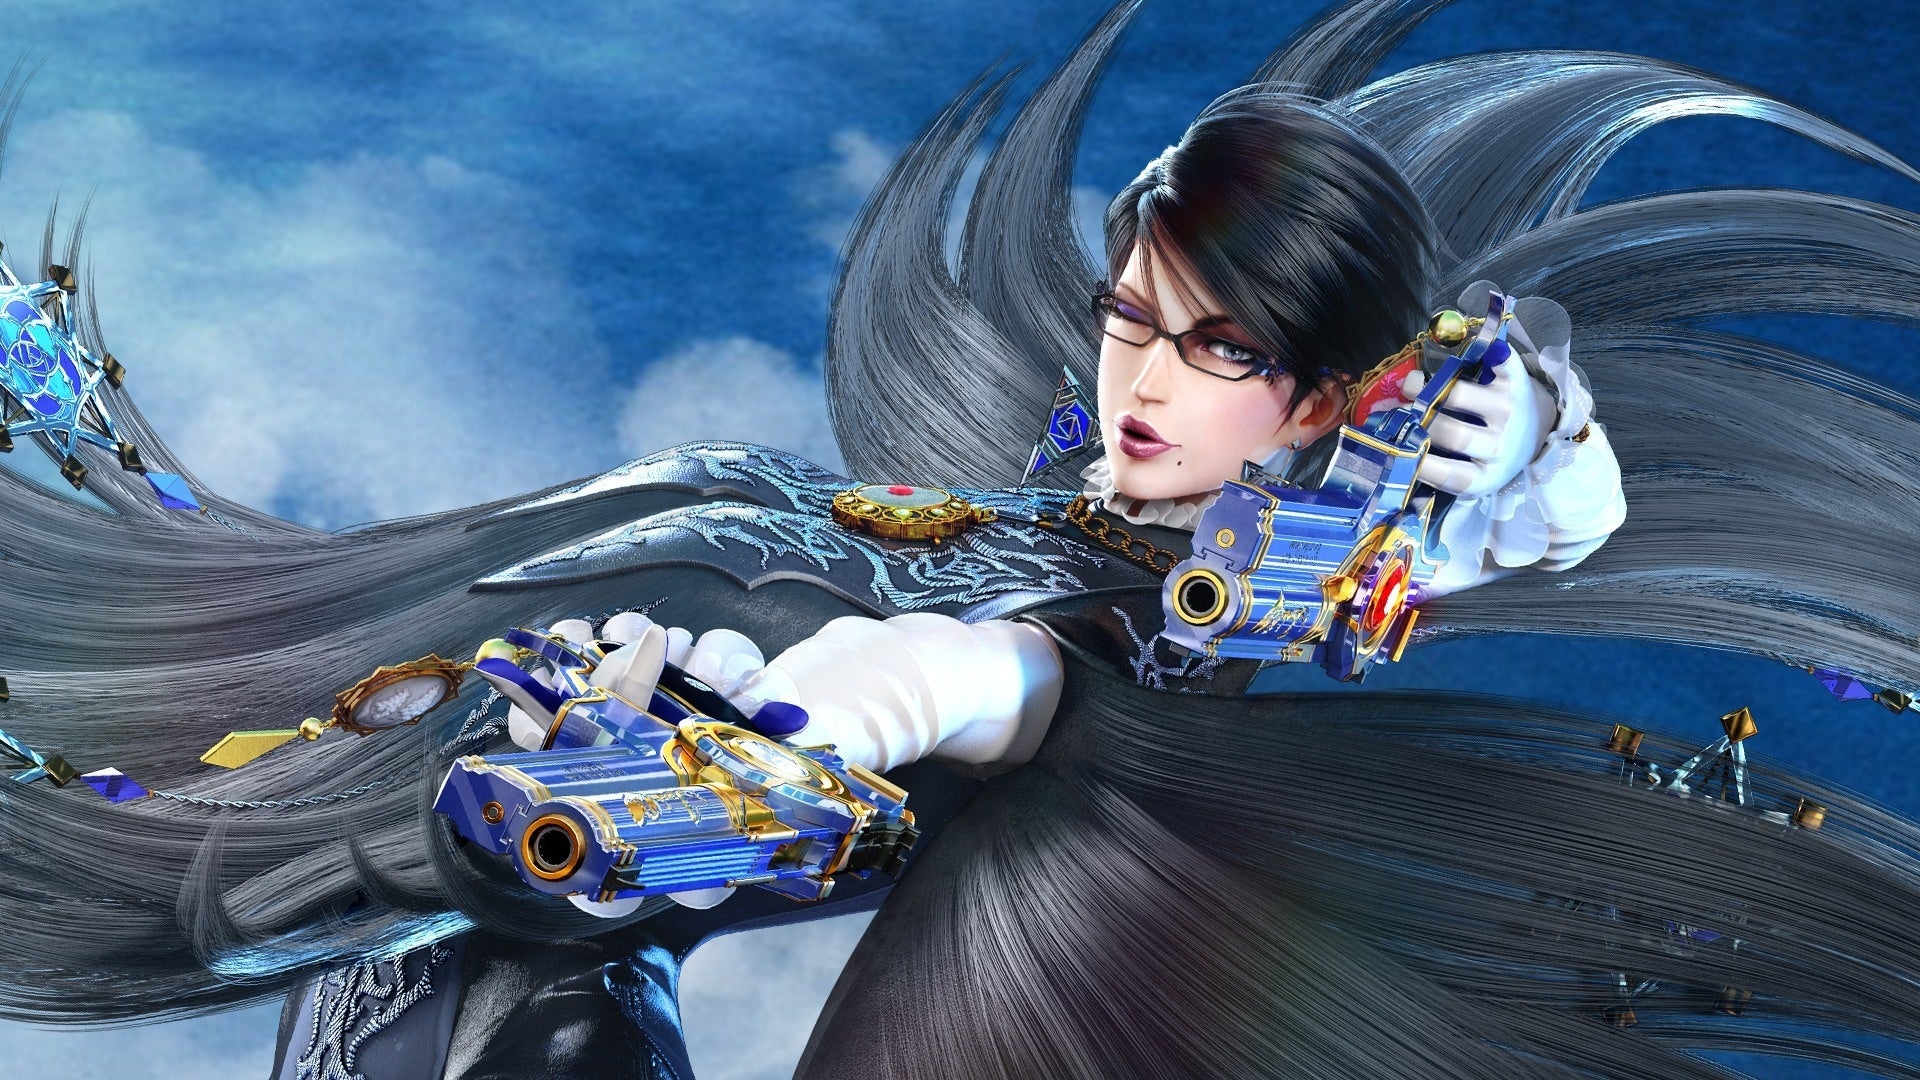 Bayonetta 3: Cereza, Caused a rift between the Umbra Witches and Lumen Sage. 1920x1080 Full HD Wallpaper.